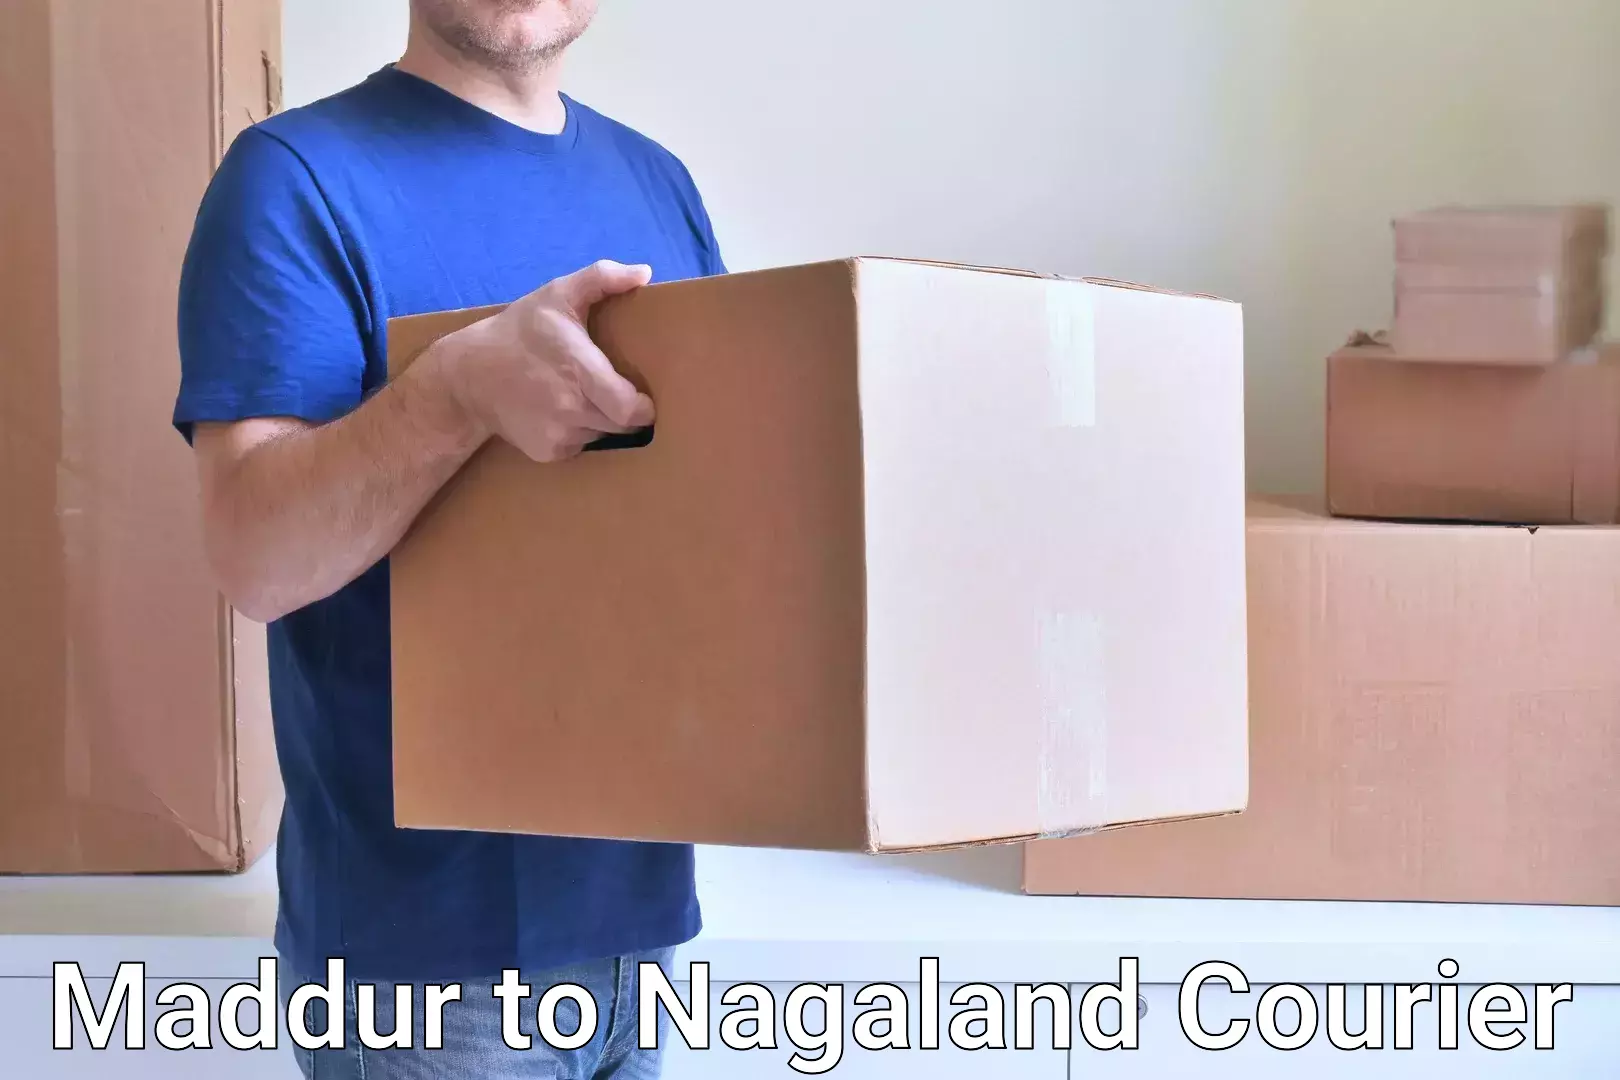 Overnight delivery services Maddur to NIT Nagaland